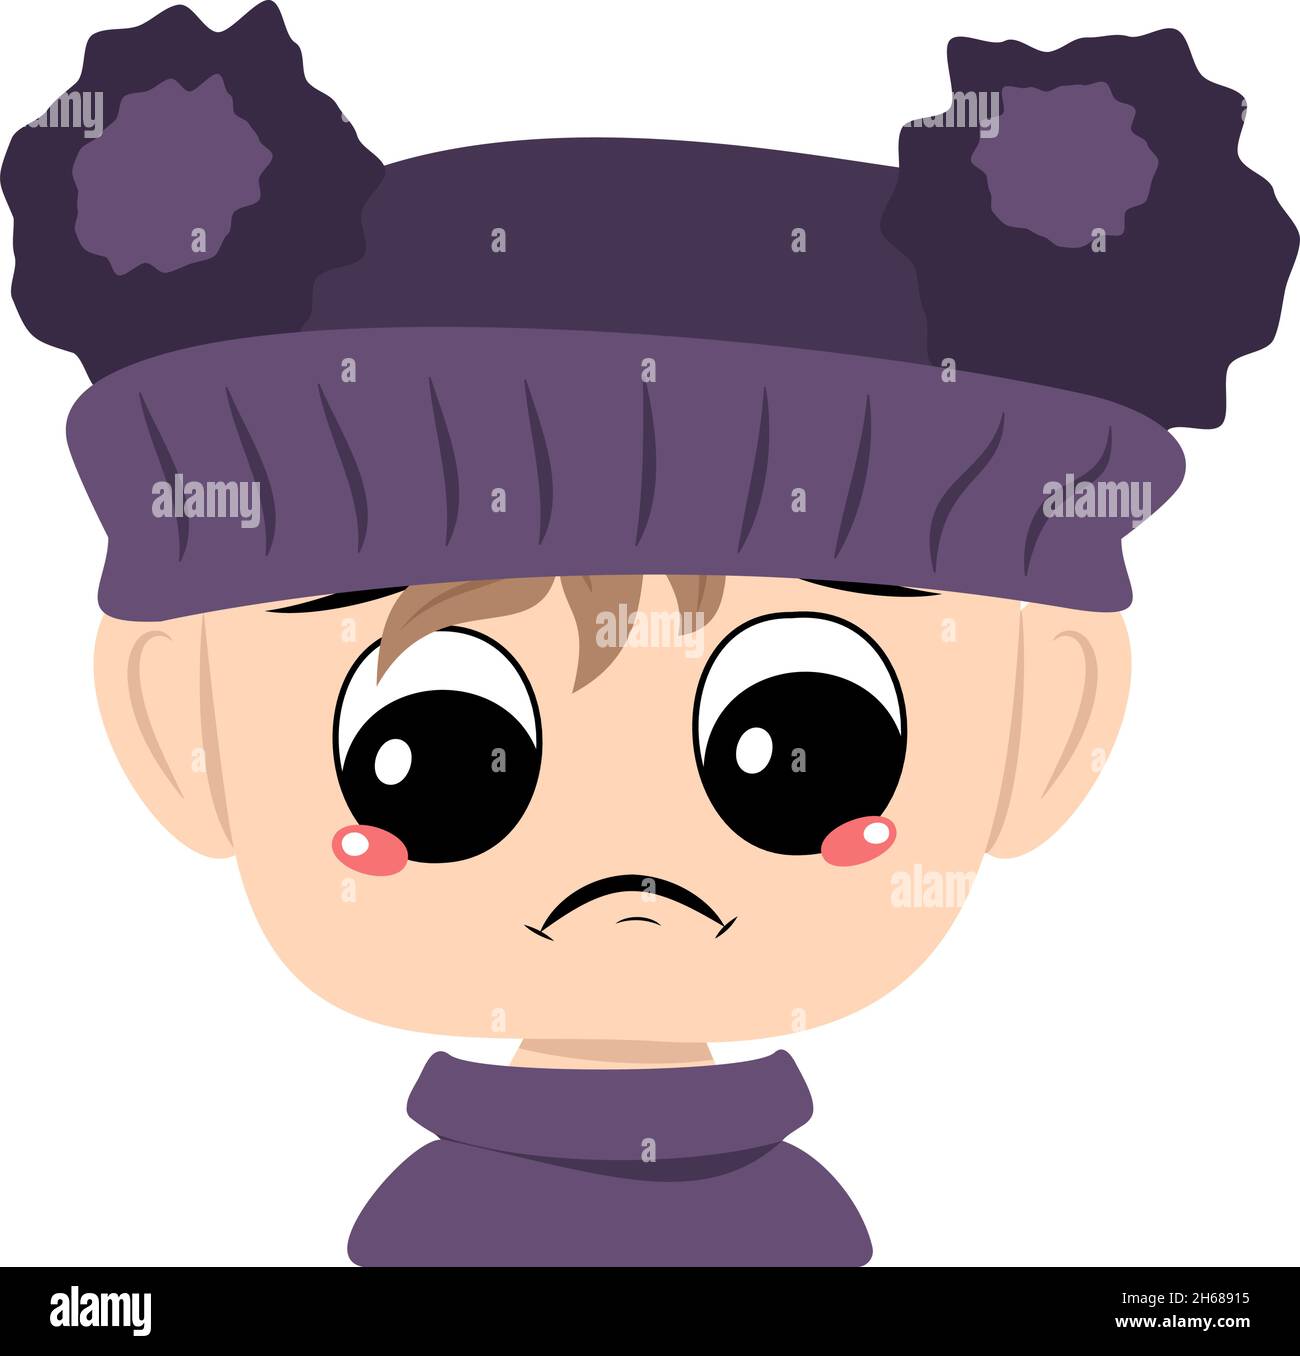 Child with sad emotions, depressed face, down eyes in violet hat with pom pom. Head of toddler with melancholy expression Stock Vector